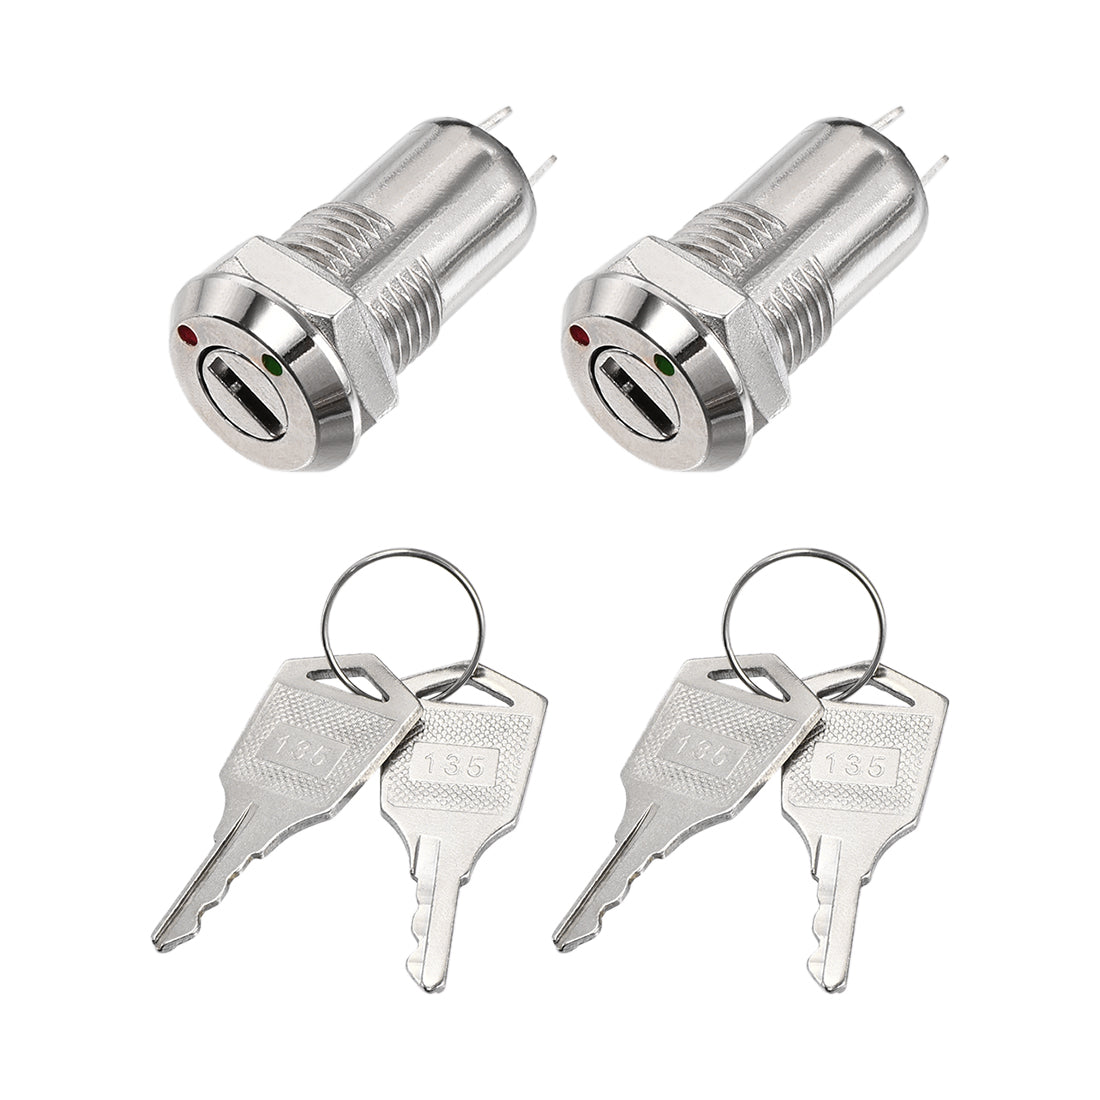 uxcell Uxcell 12mm 2 Positions Key Locking Push Button Switch With Keys NO-OFF 2pcs